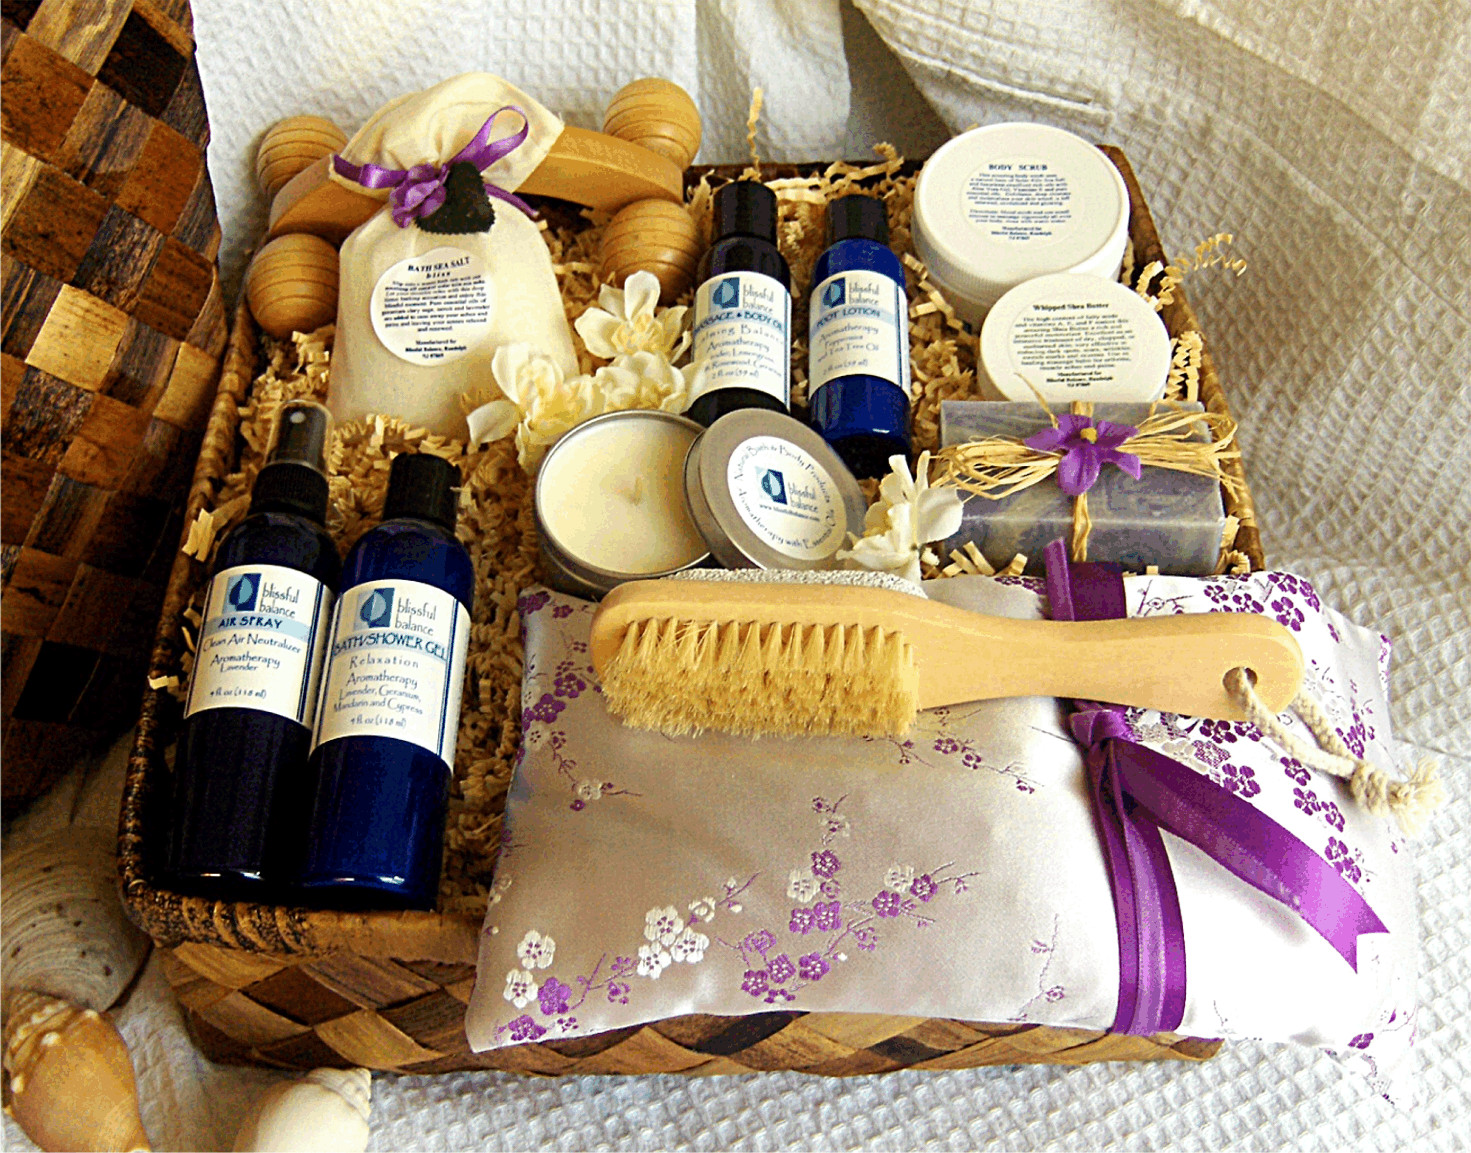 Spa Gift Basket Ideas Homemade
 Top 10 Romantic Ideas Gift Basket For Valentine s Day